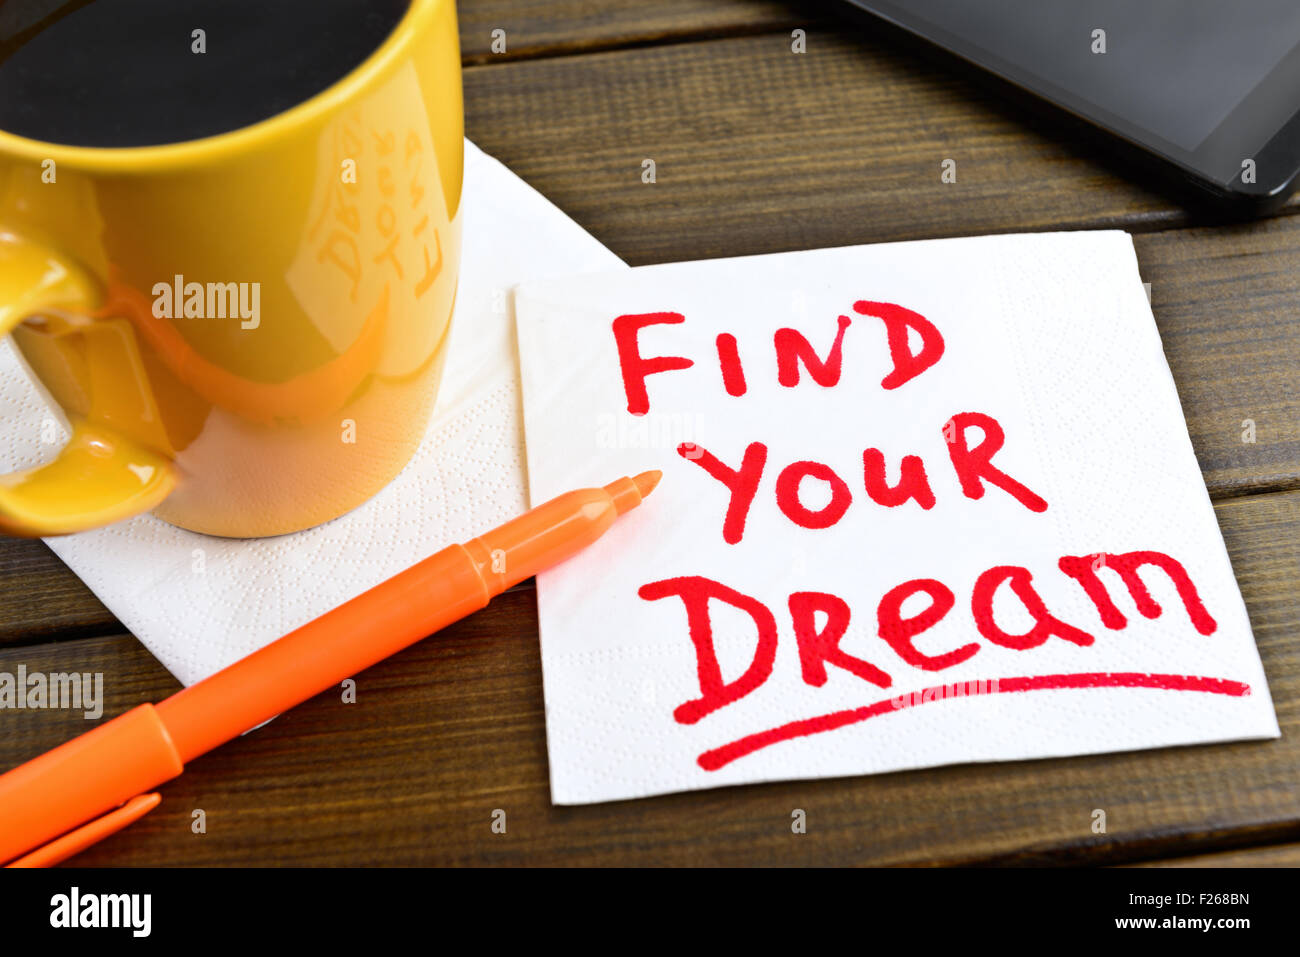 Find your dream - motivational handwriting on a napkin with a cup of coffee and phone Stock Photo